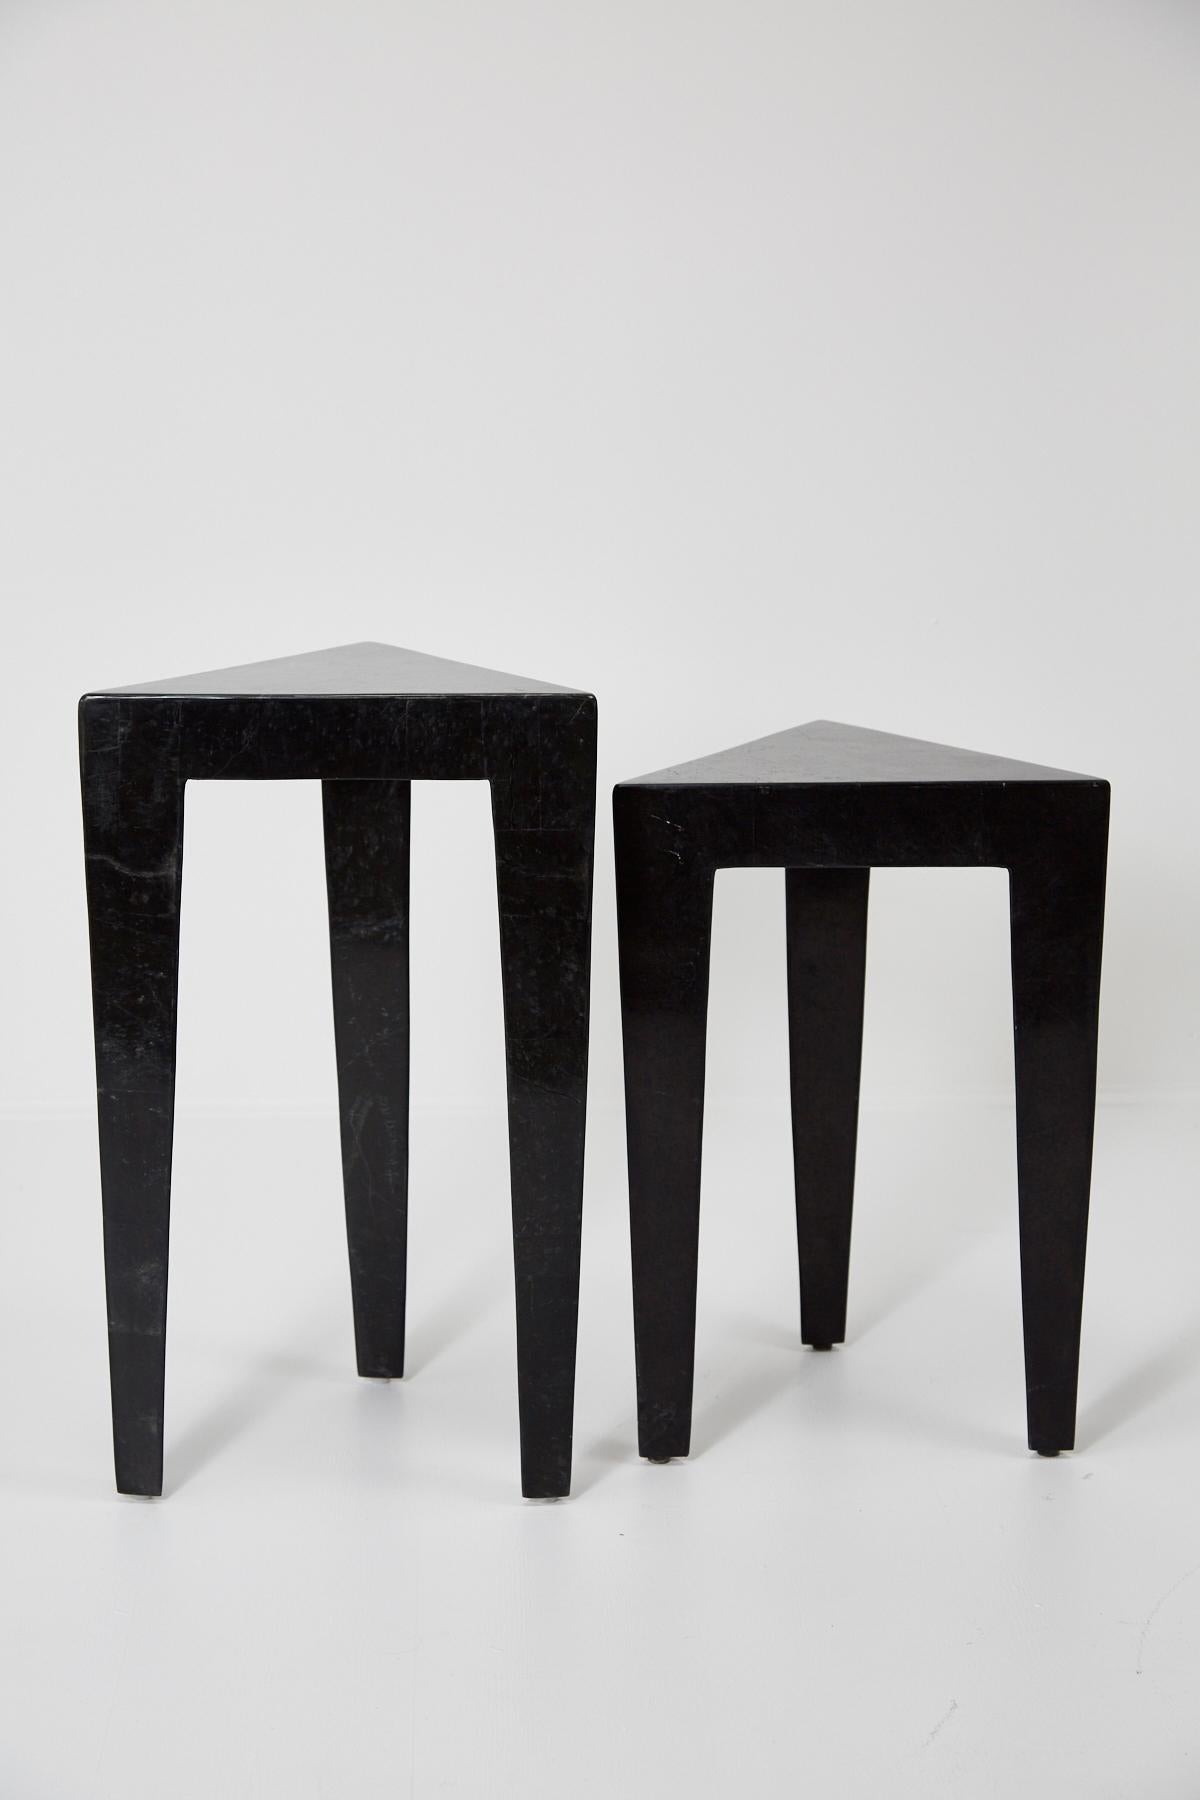 Black Tessellated Stone Triangular Nesting Tables, 1990s For Sale 4